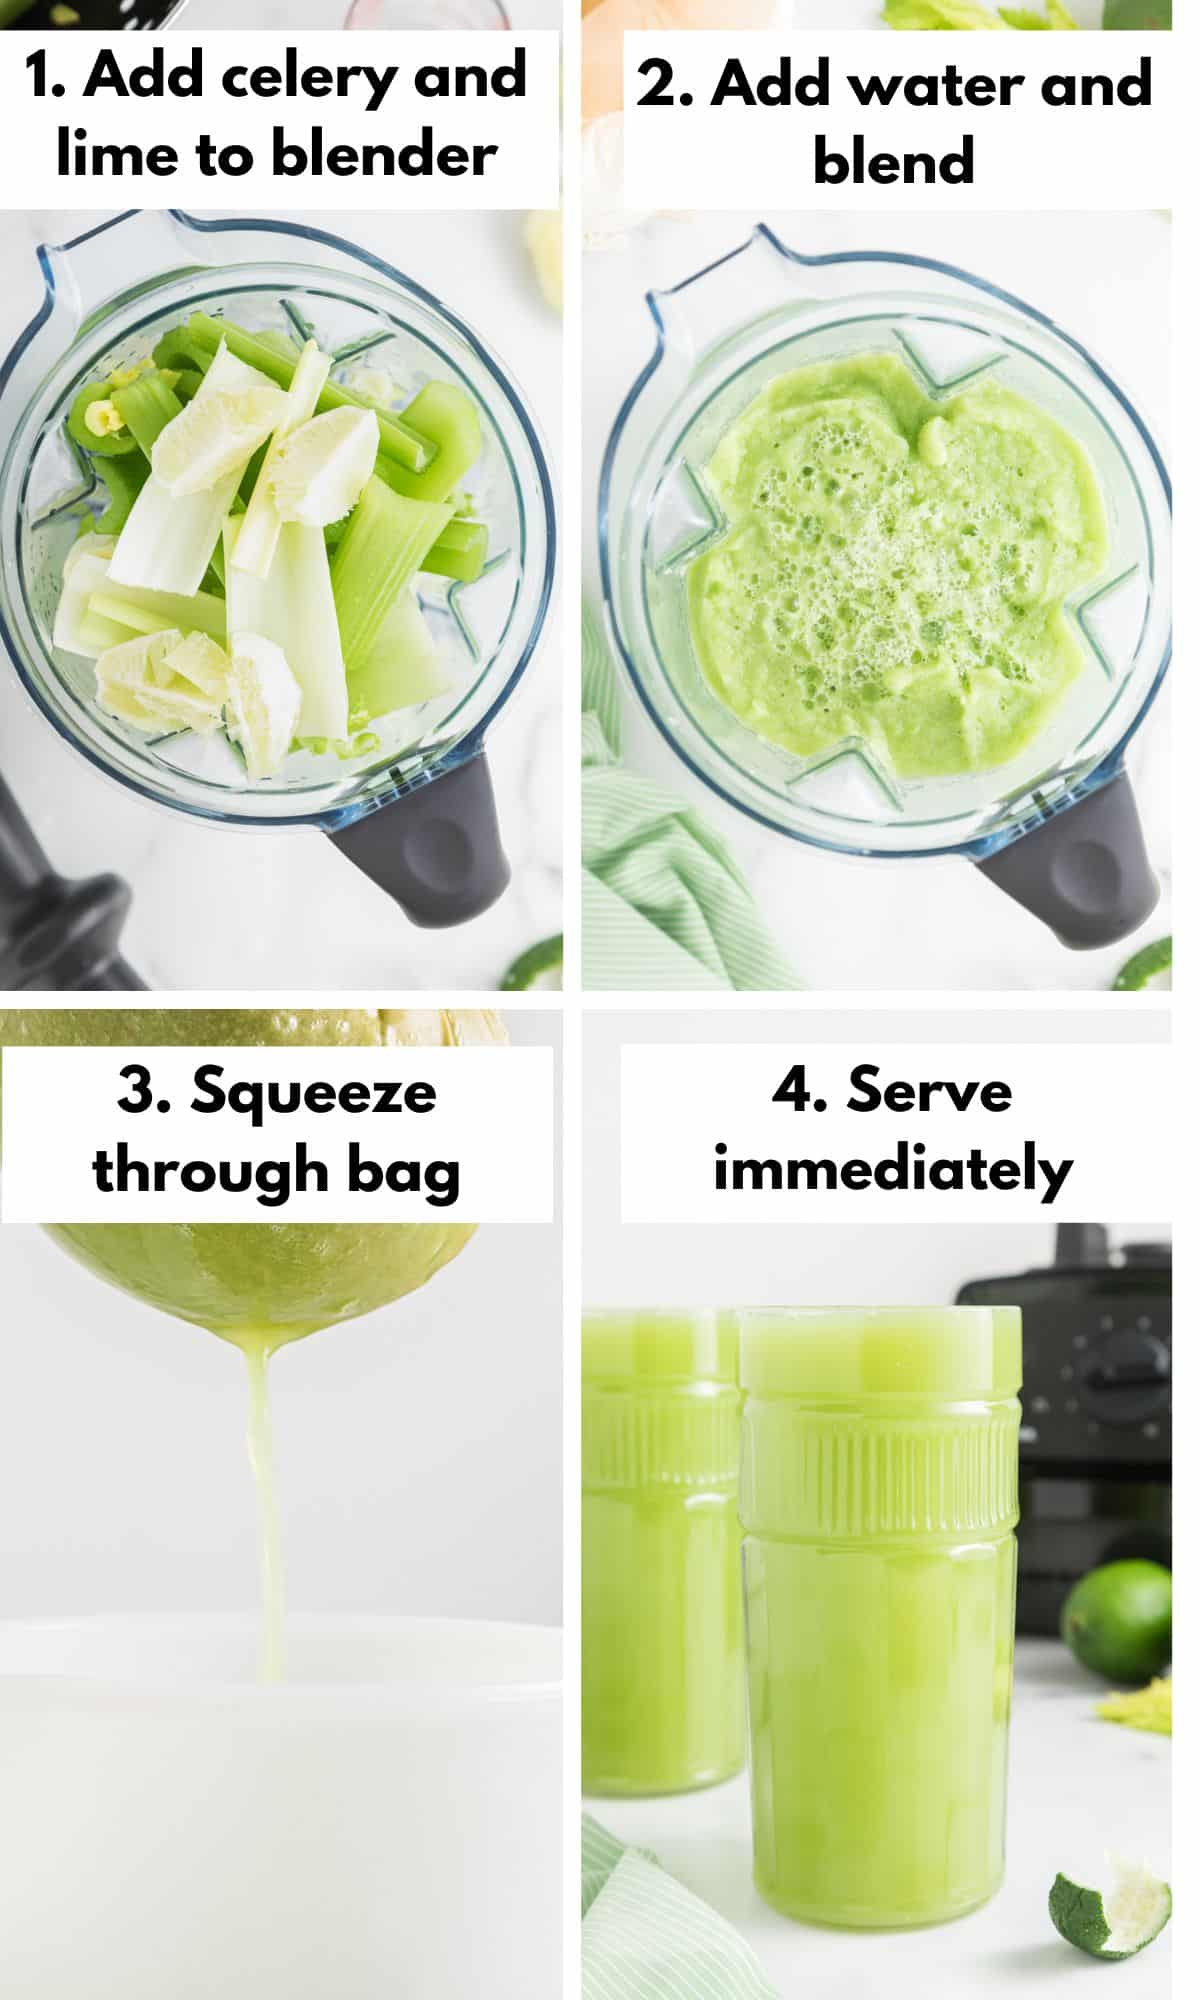 Blenders - Guides, Care & Recipes